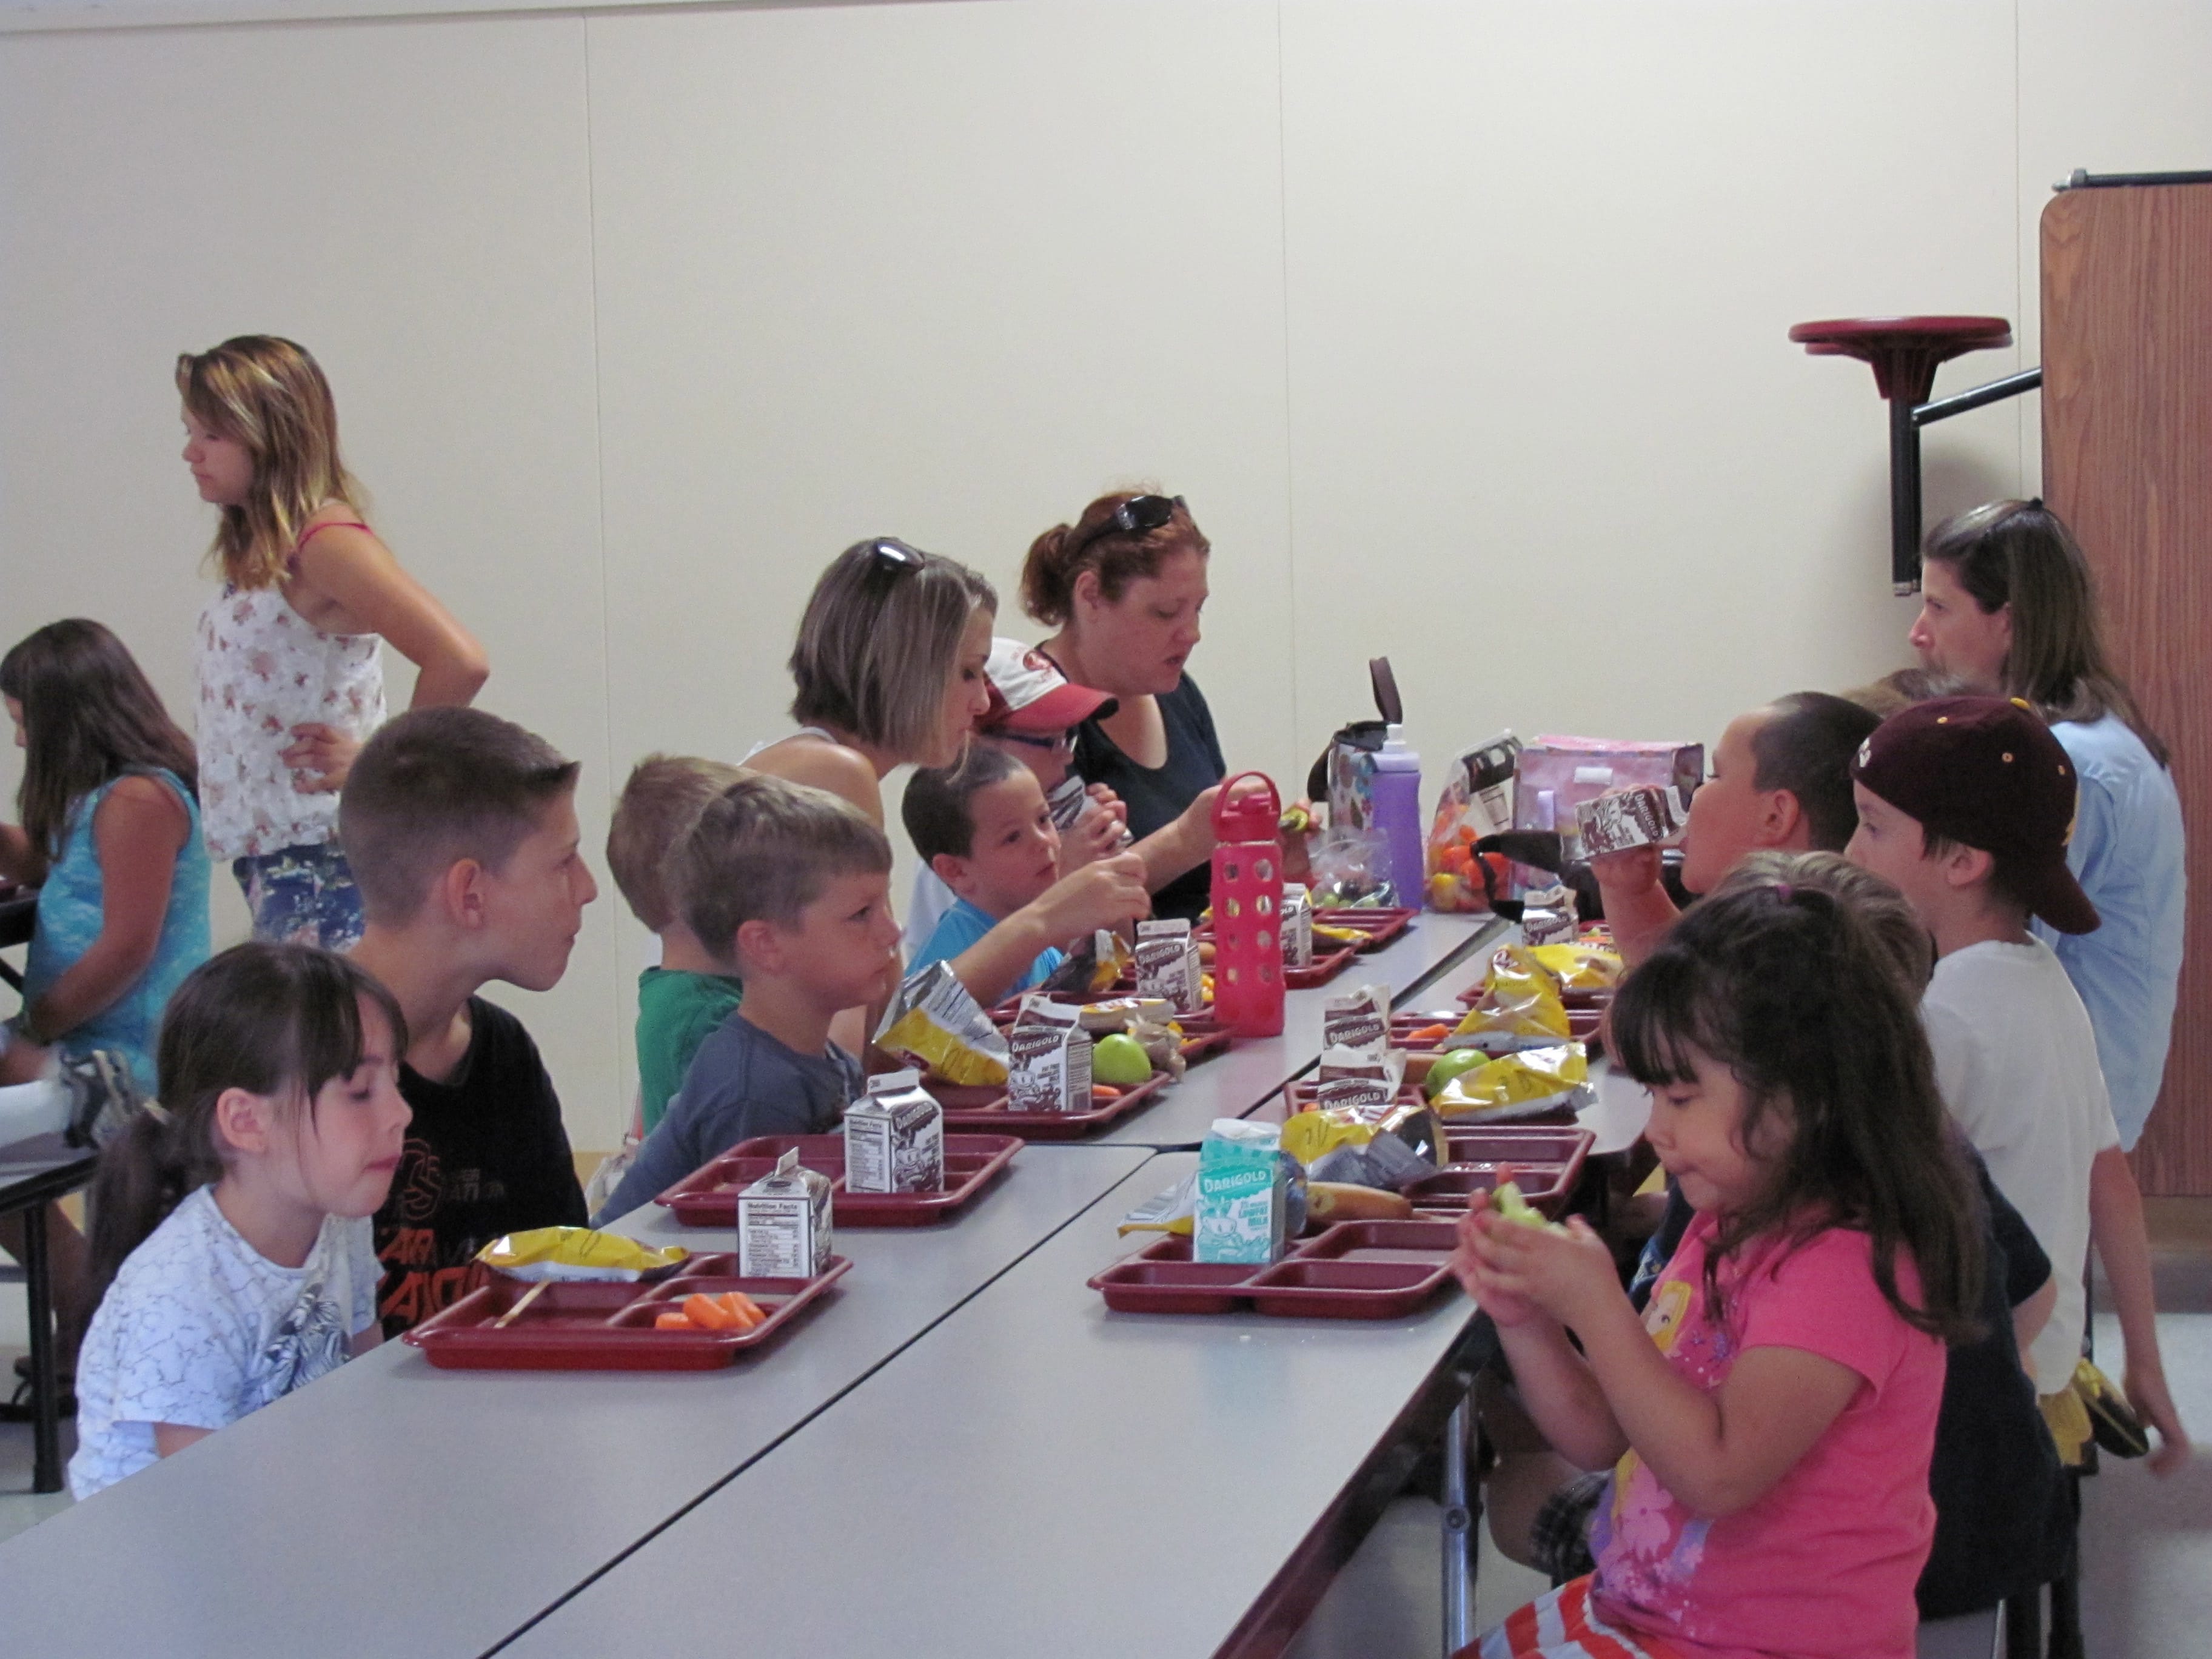 A variety of students access Hathaway's free summer lunch program, from those in local Community Education programs  to those participating in credit recovery. The lunches run from 11:45 a.m. to 12:45 p.m. Monday through Friday, until Aug.